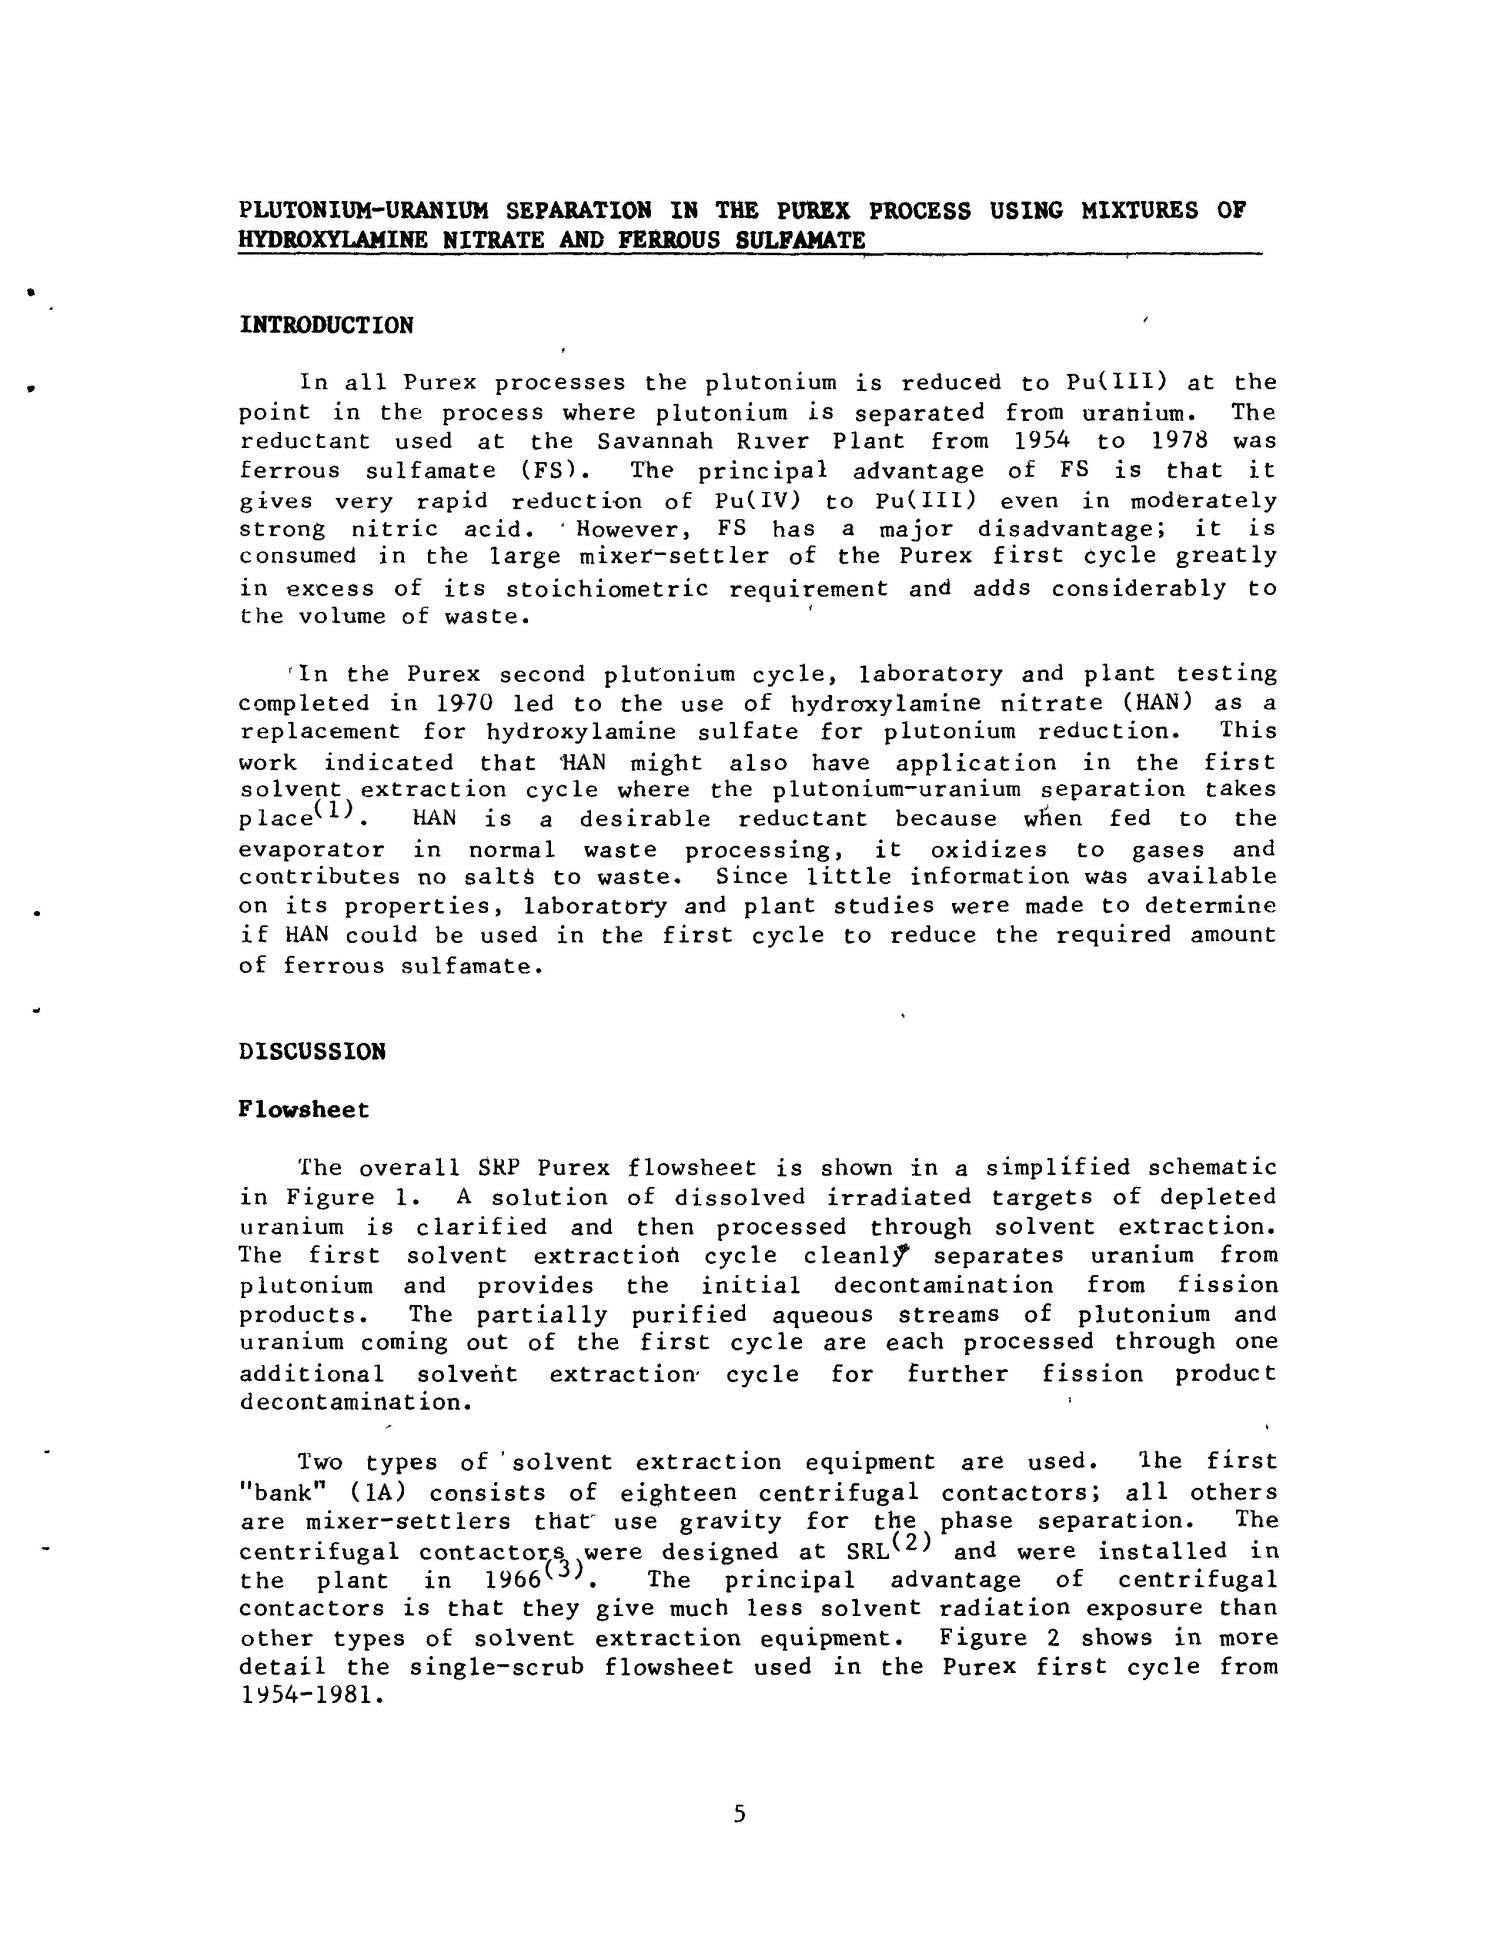 Plutonium-uranium separation in the Purex process using mixtures of hydroxylamine nitrate and ferrous sulfamate
                                                
                                                    [Sequence #]: 7 of 29
                                                